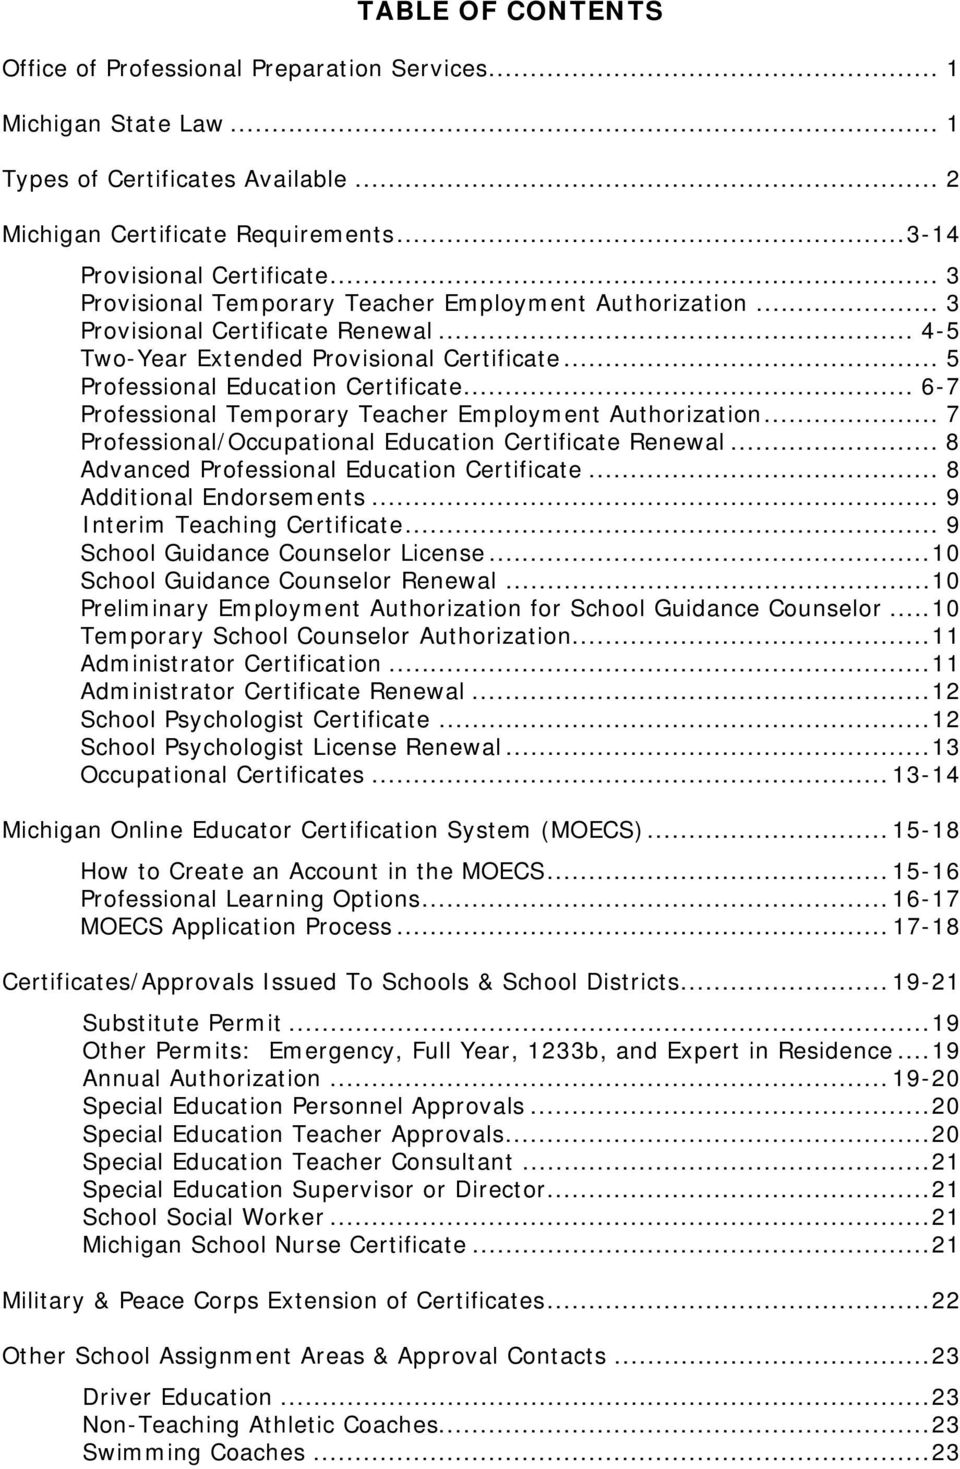 .. 6-7 Professional Temporary Teacher Employment Authorization... 7 Professional/Occupational Education Certificate Renewal... 8 Advanced Professional Education Certificate... 8 Additional Endorsements.